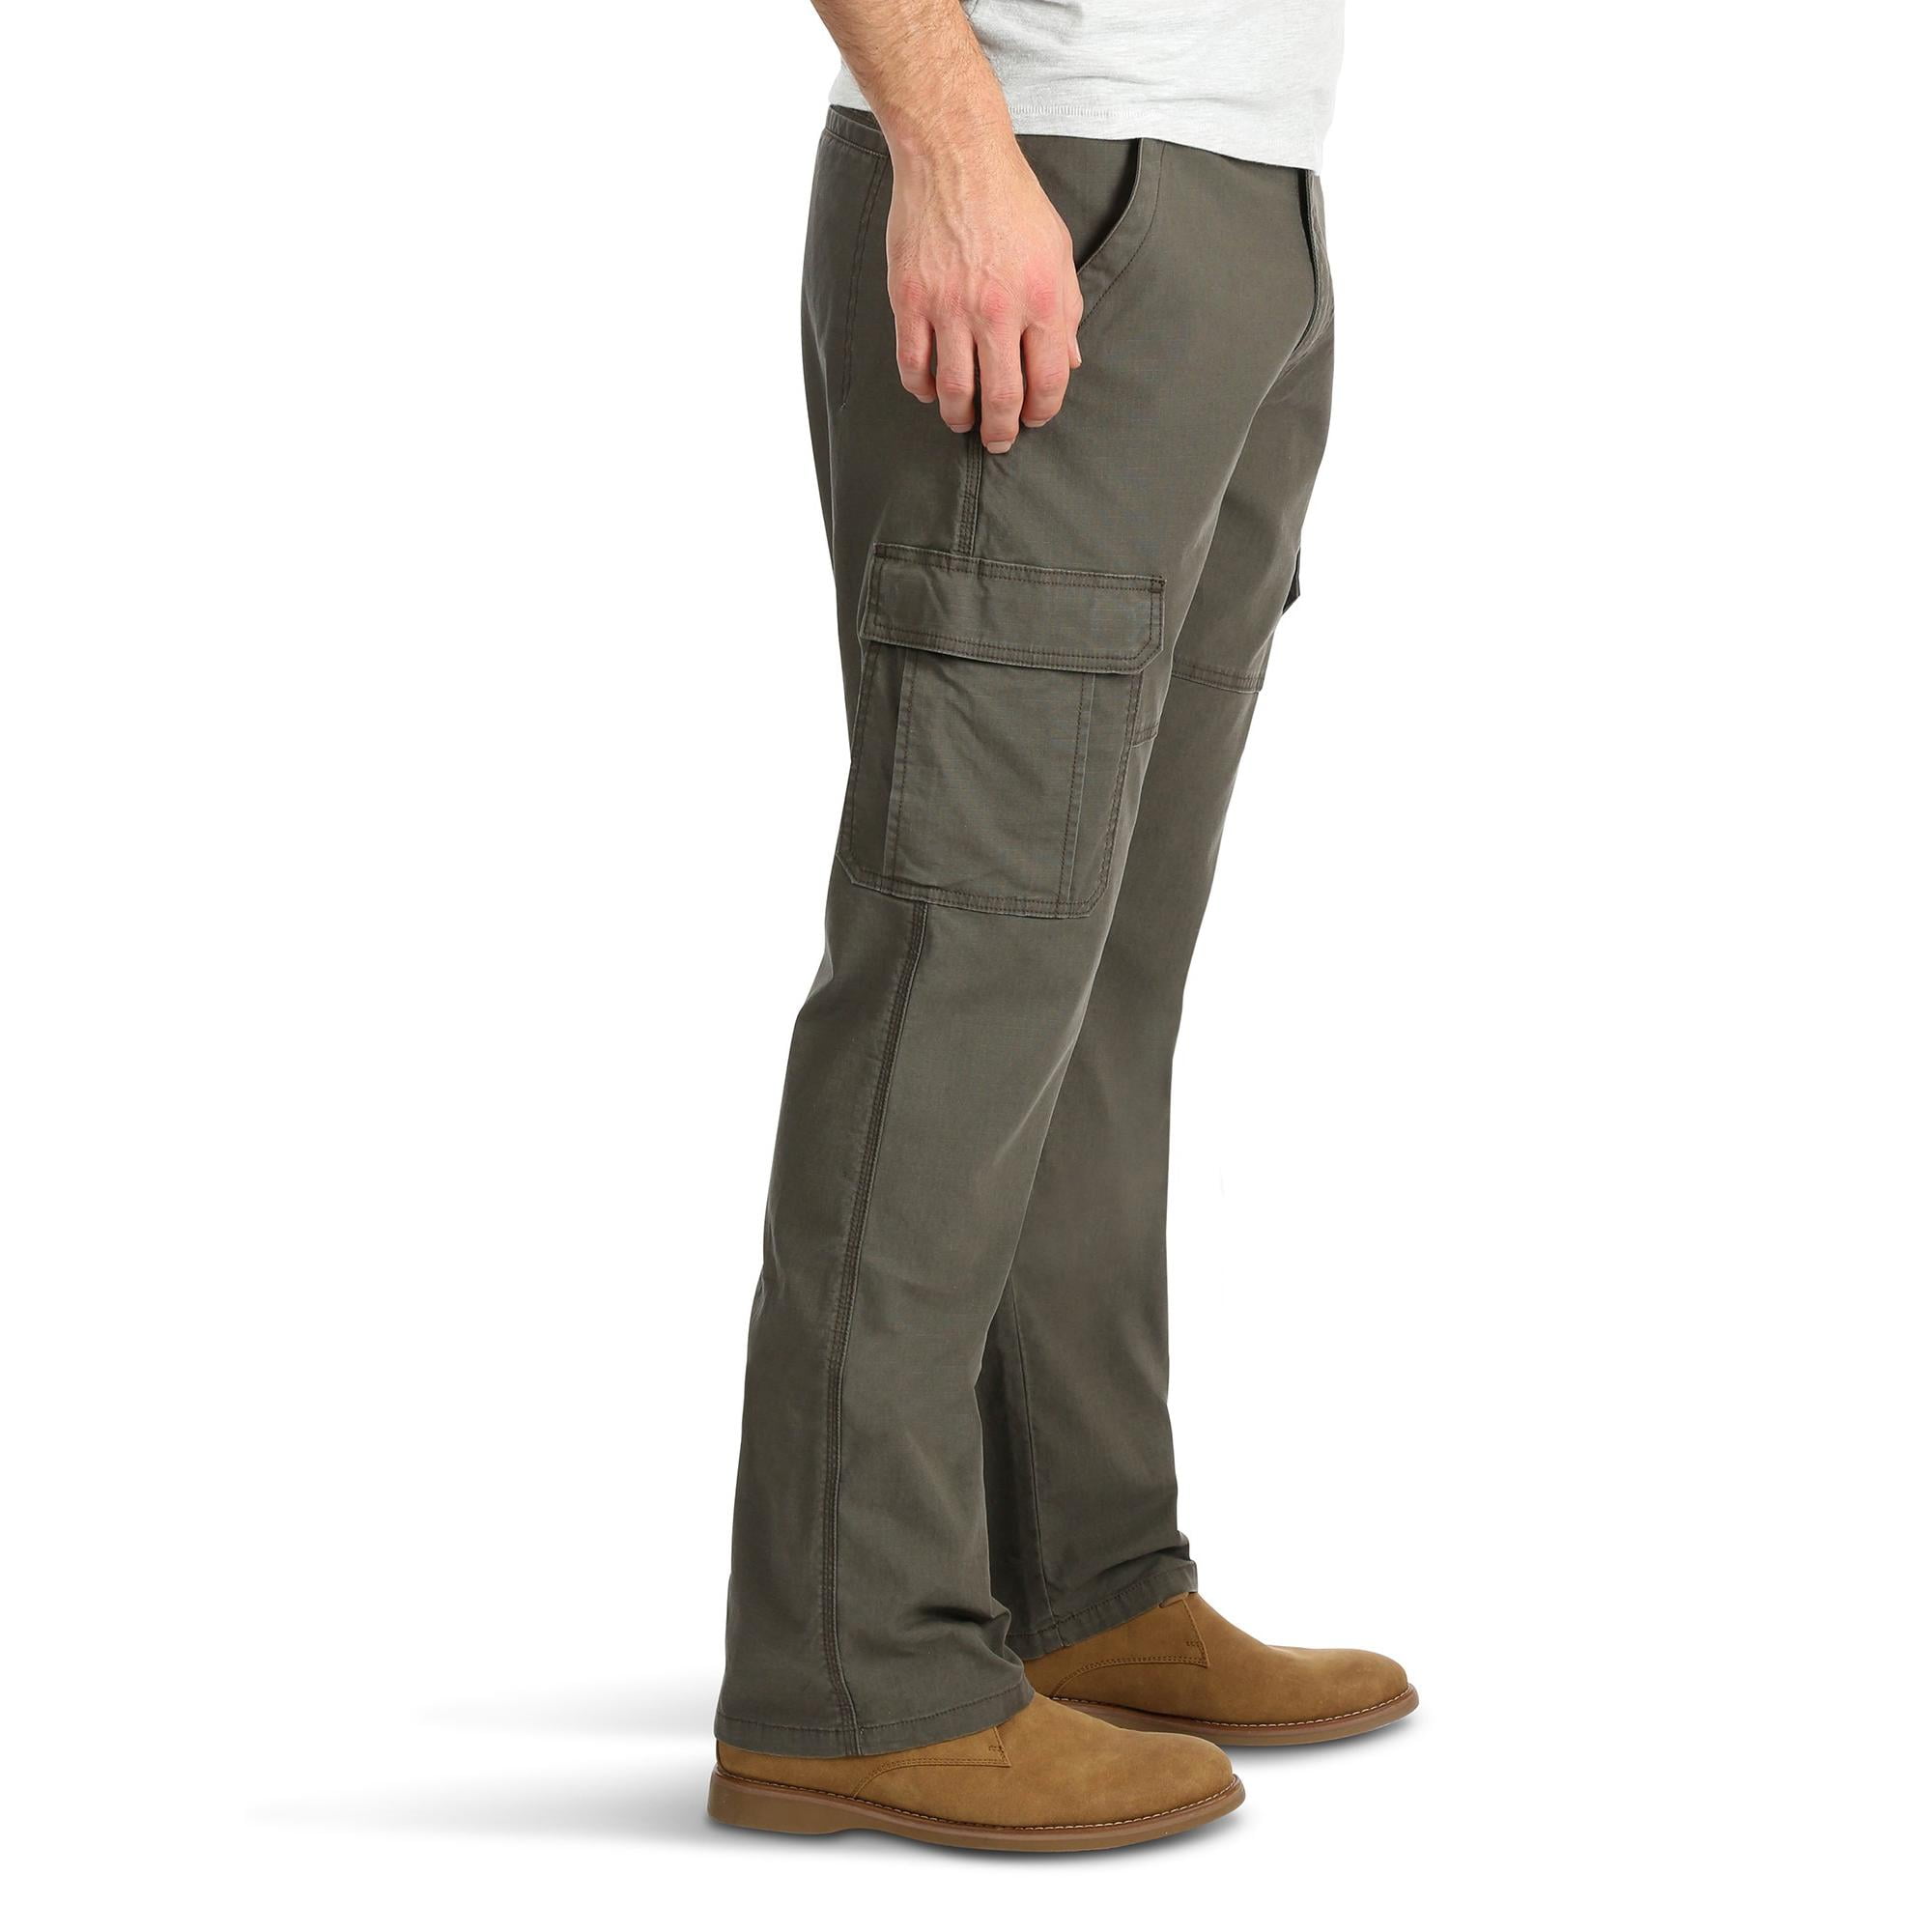  Under 10.00 Dollar Items For Men Relaxed Fit Cargo